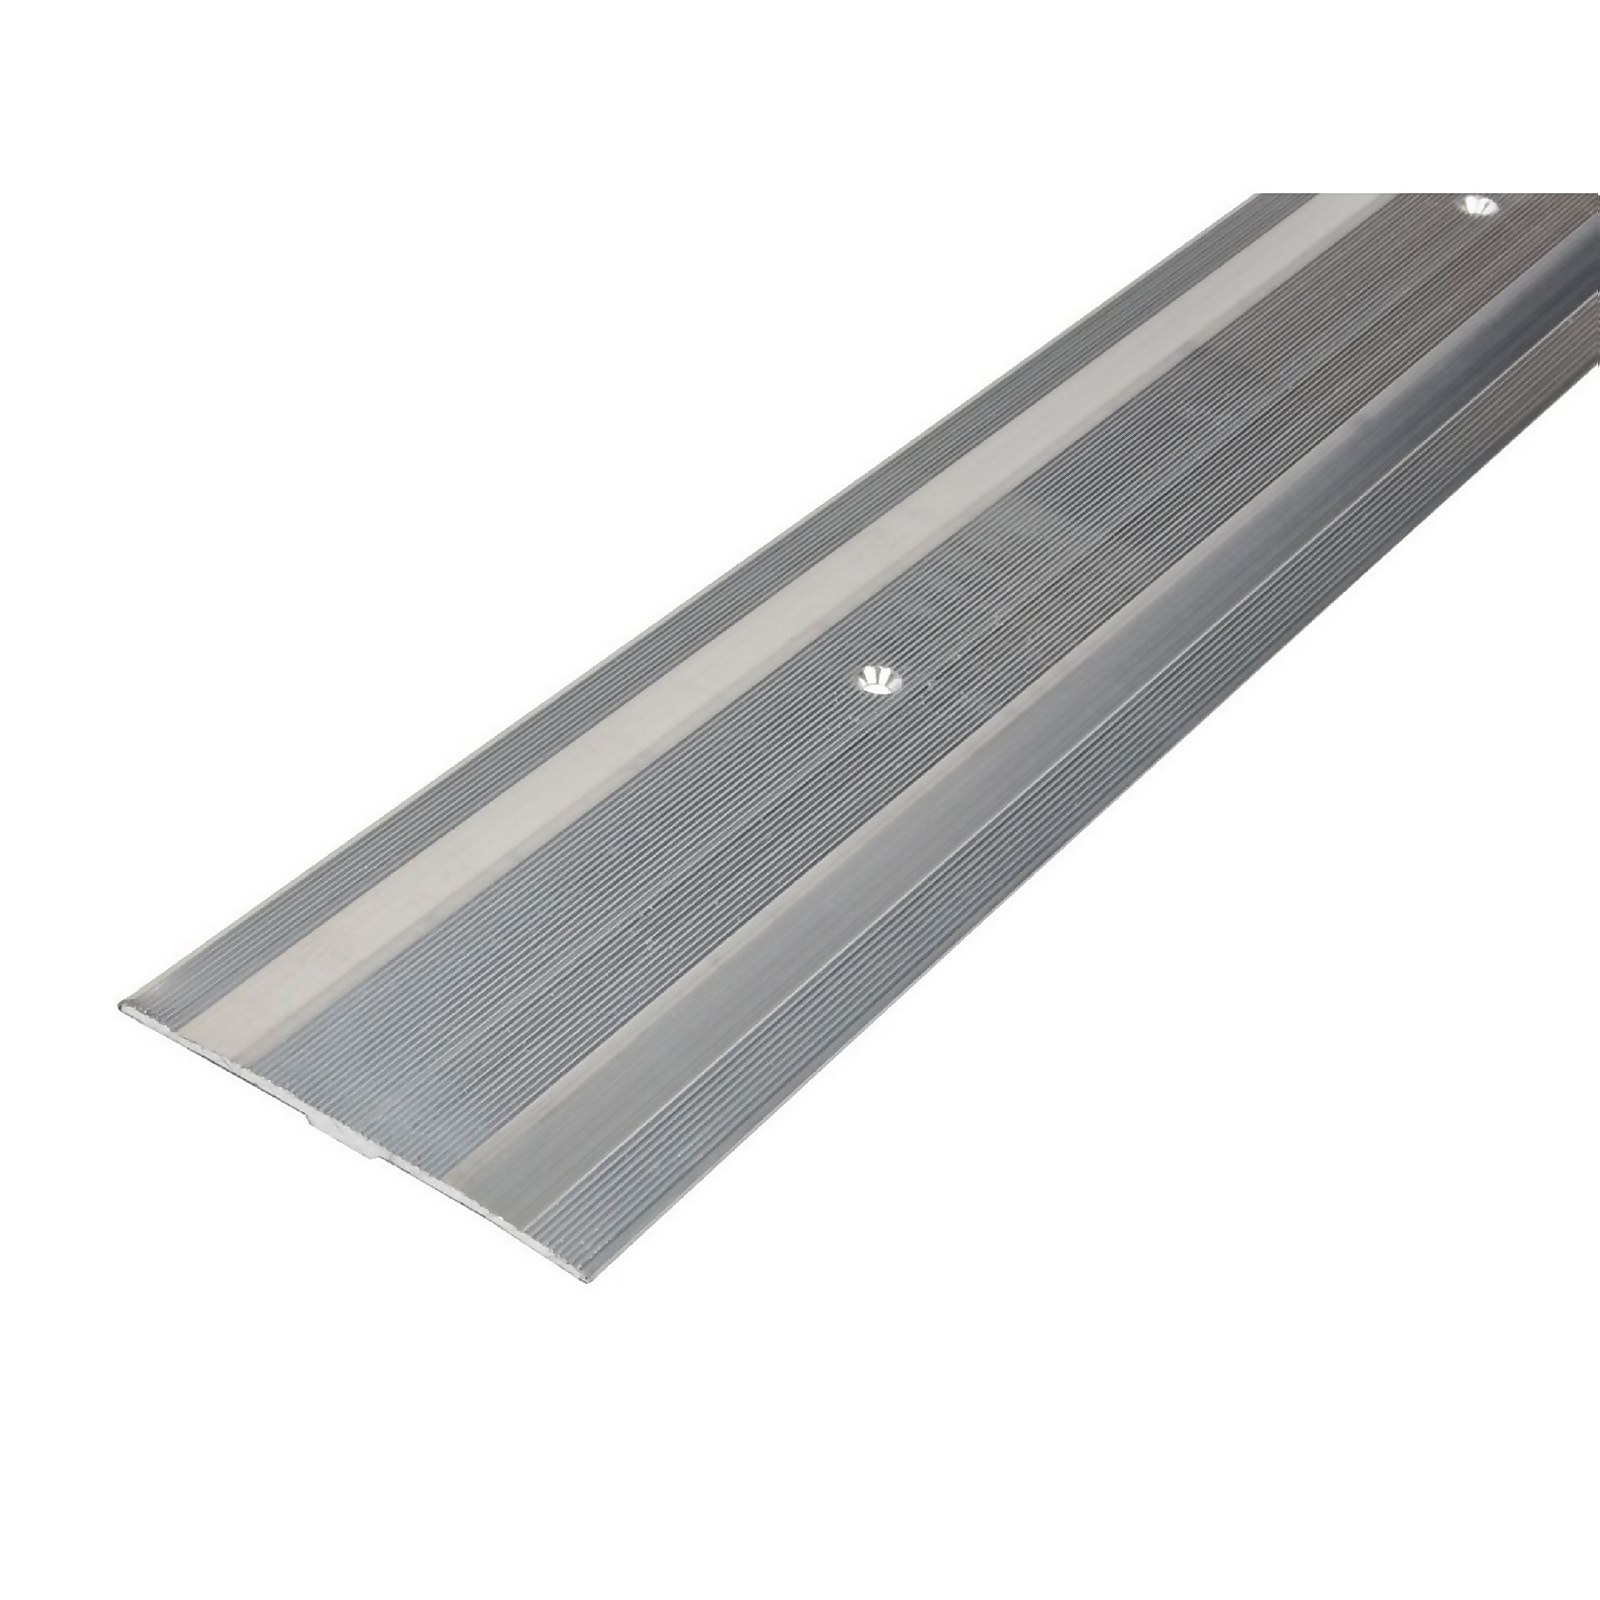 Photo of Extra Wide Cover Strip Carpet Edge - Silver 1800mm